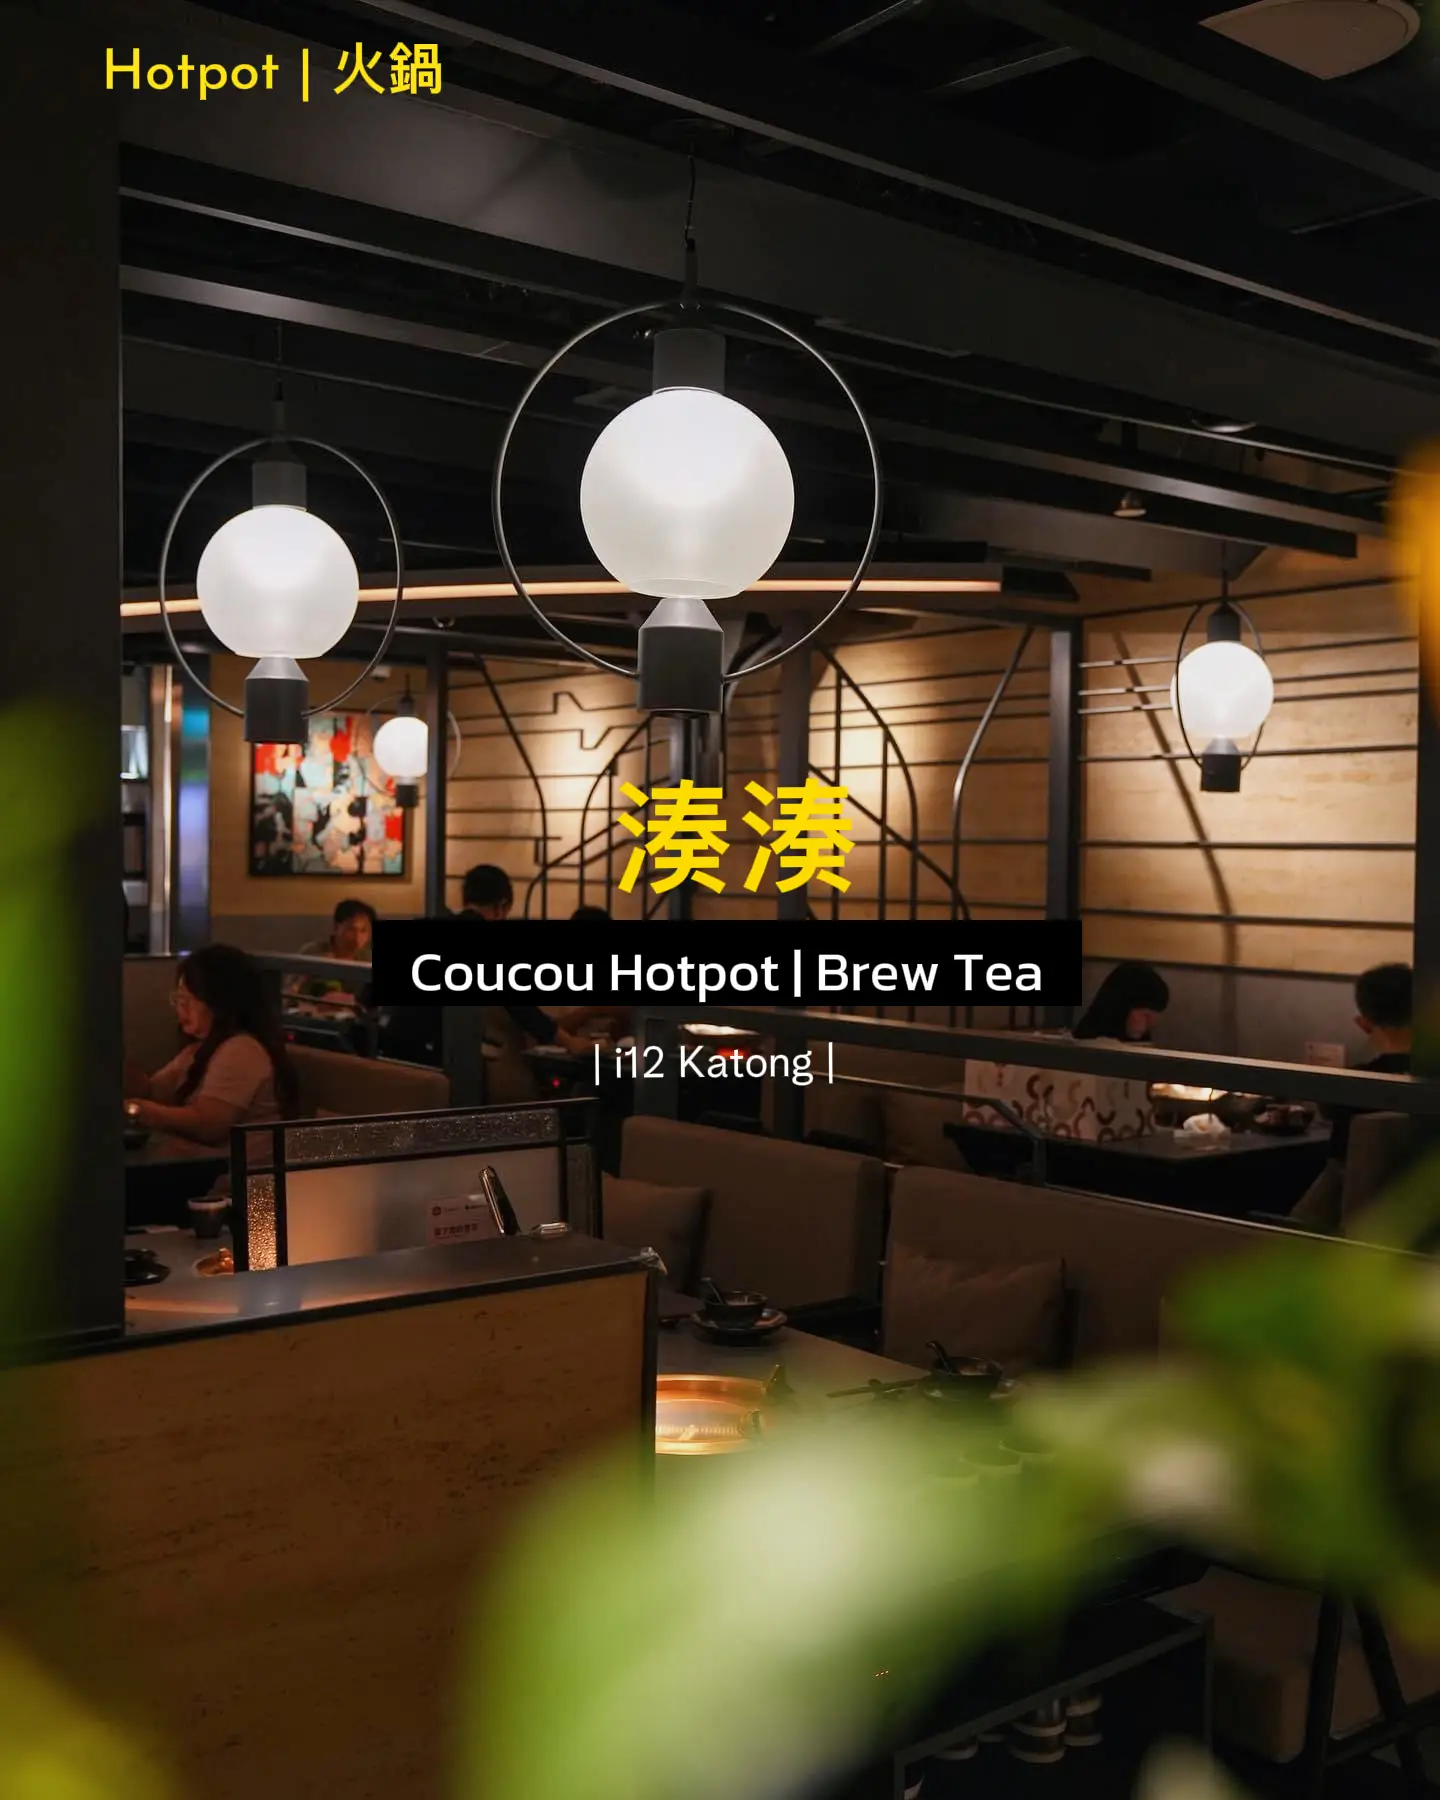 Coucou Hotpot Singapore – Taiwanese-Style Hotpot Restaurant Opens NEW Jewel  Changi Airport Outlet. i12 Katong Likely To Be Next Location 